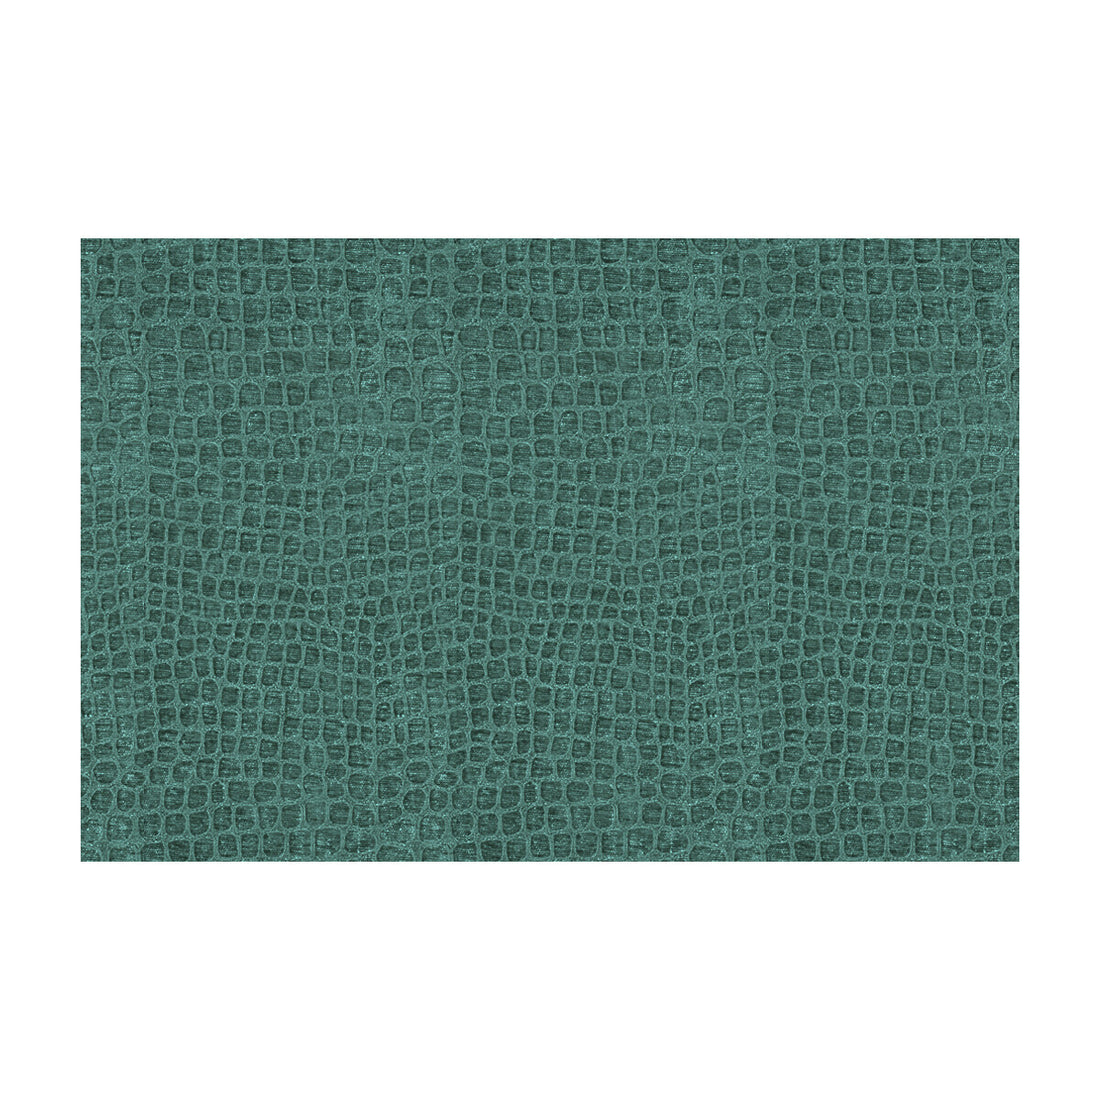 Finnian fabric in mermaid color - pattern 33107.35.0 - by Kravet Contract